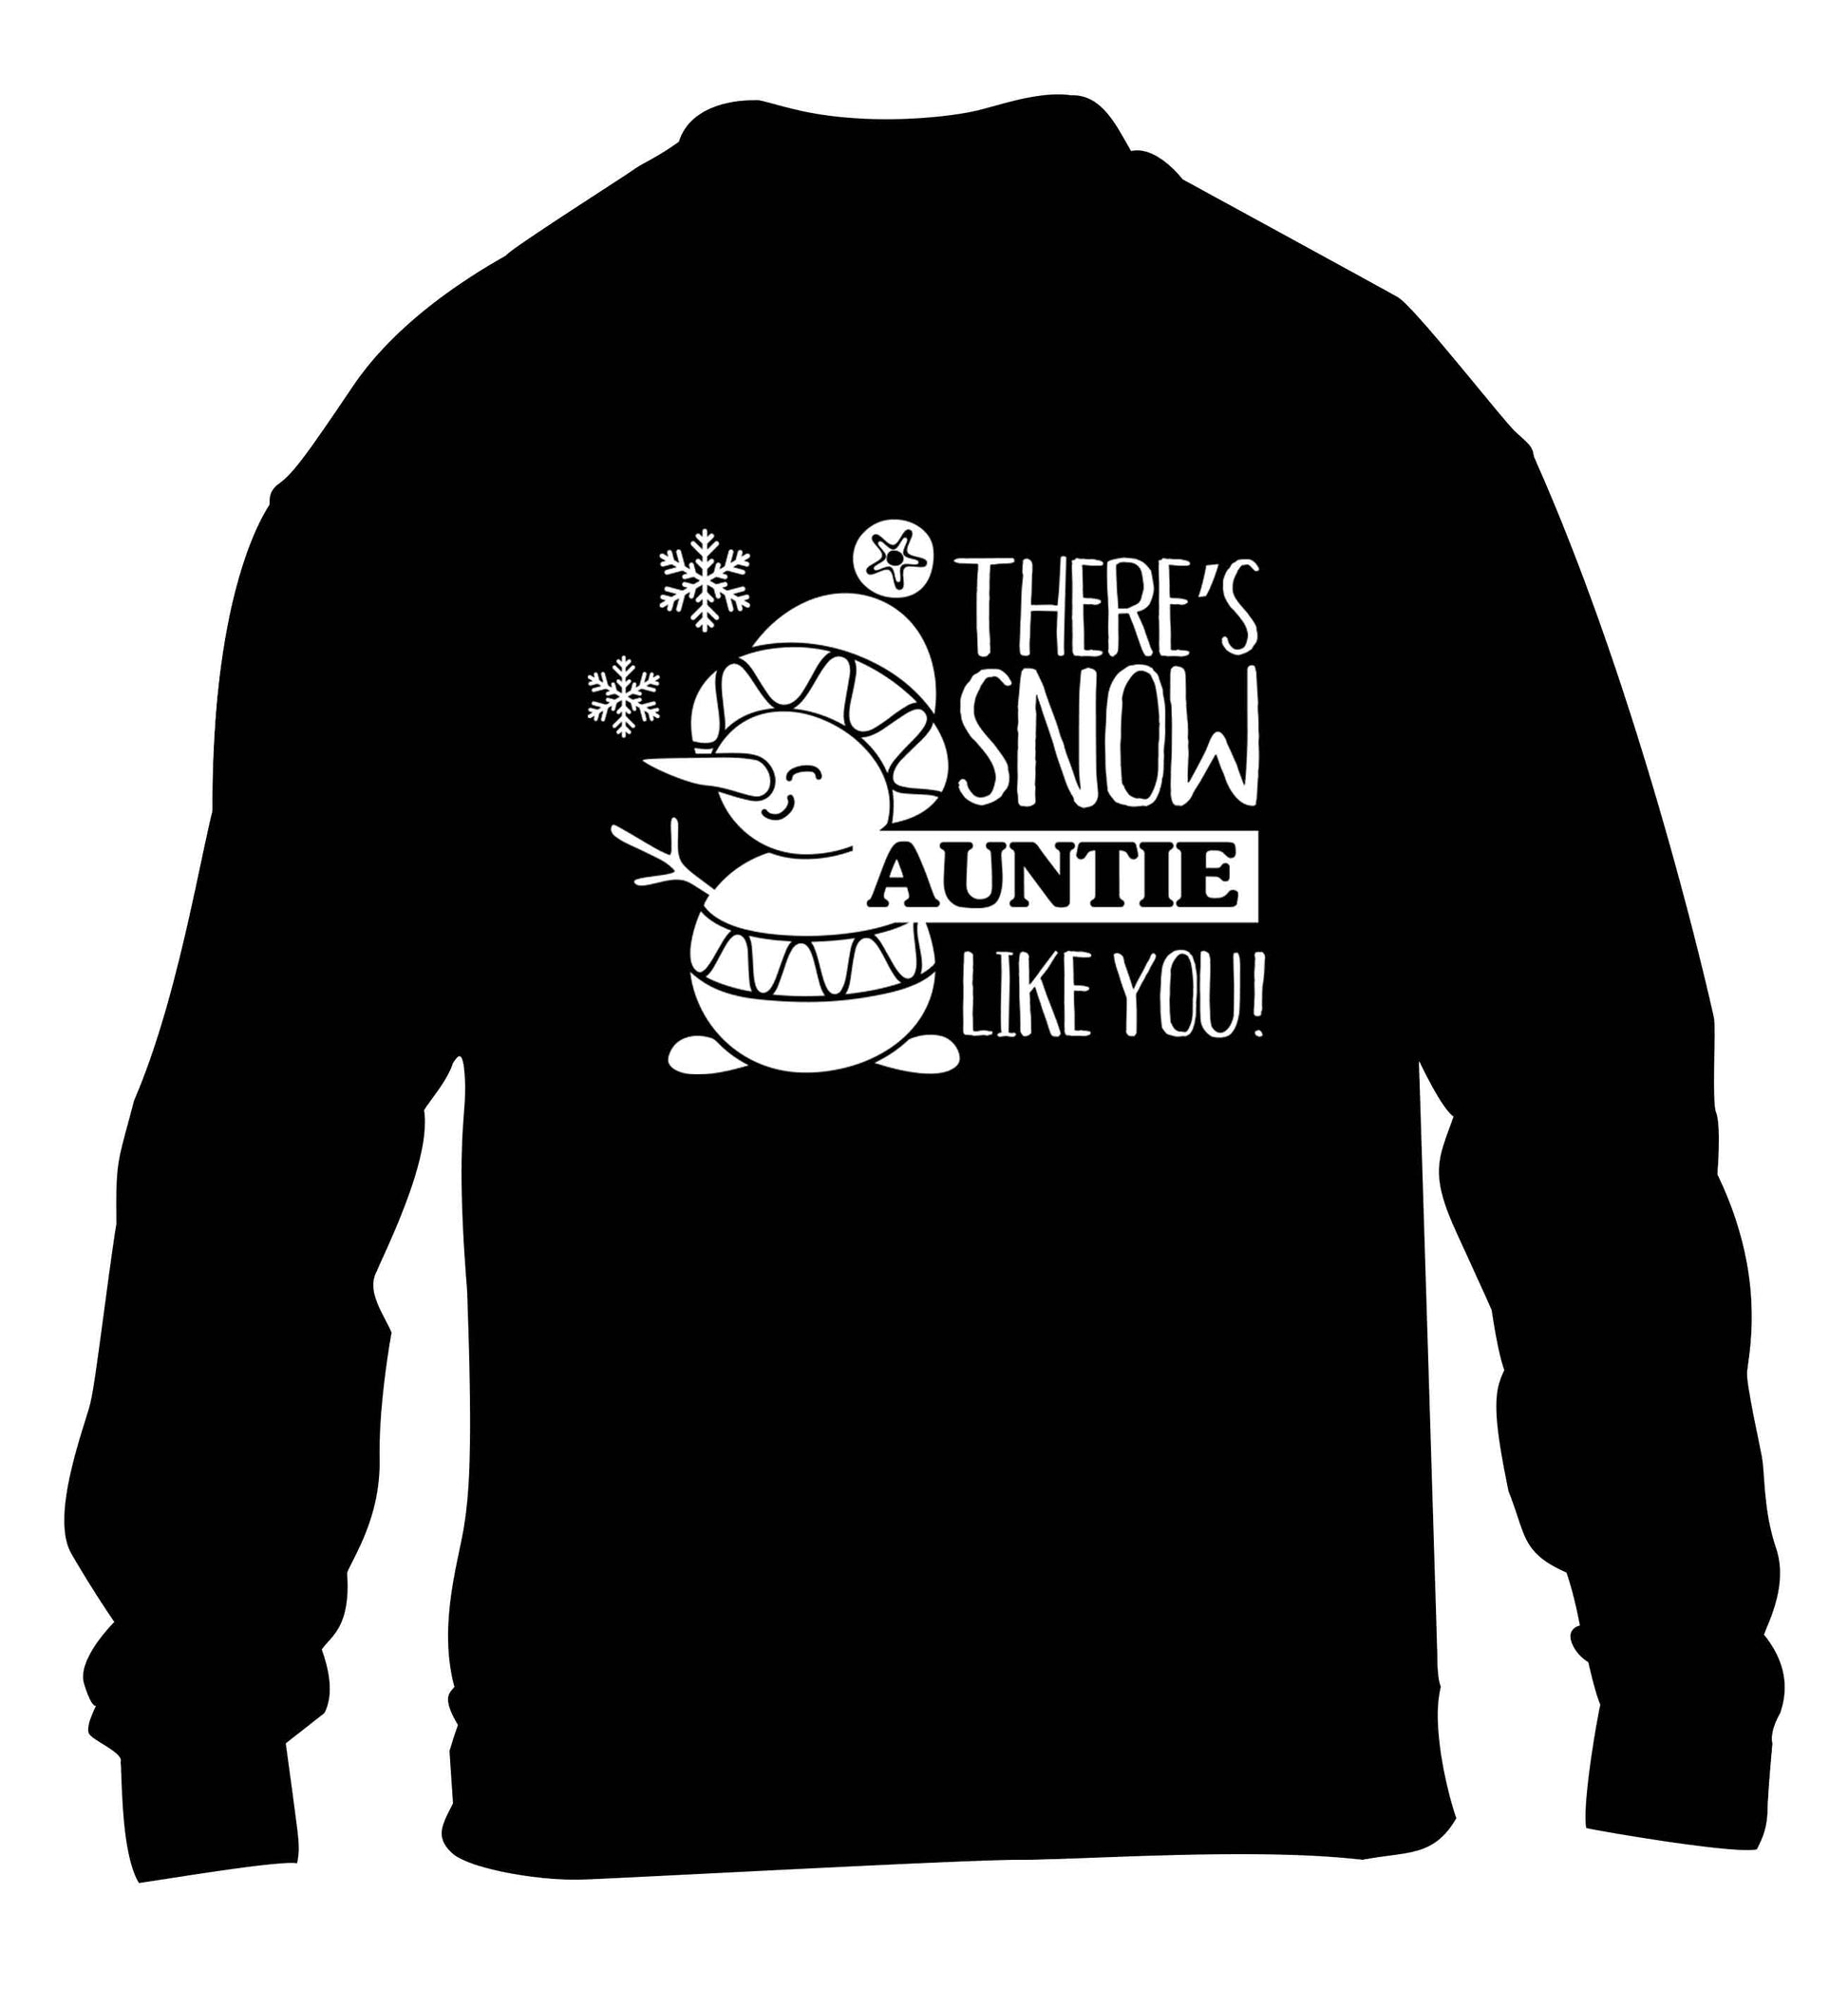 There's snow auntie like you children's black sweater 12-13 Years